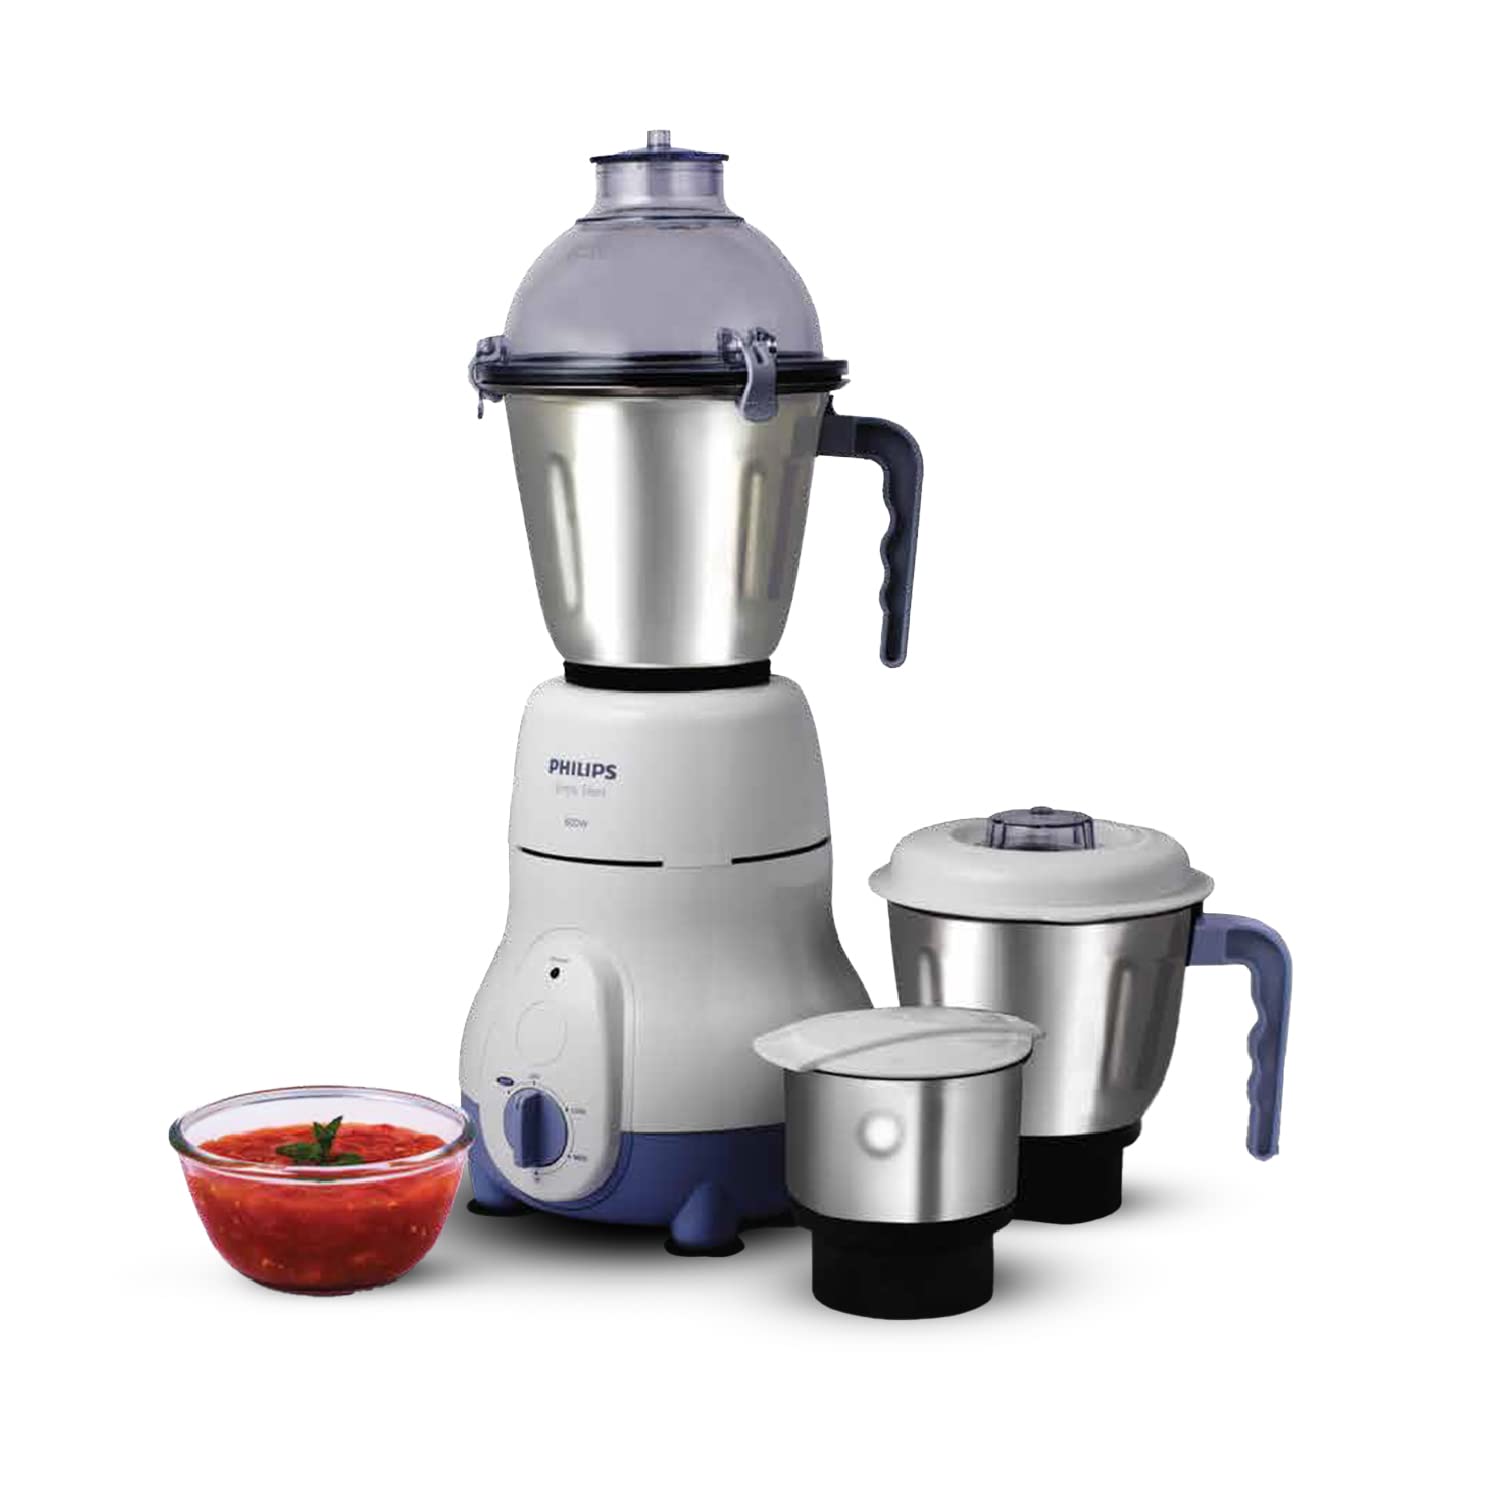 Philips HL1643/04 600-Watt Simply Silent Vertical Mixer Grinder with 3 Jars (White/Blue) - Premium Mixer Grinder from philips - Just Rs. 4670! Shop now at Surana Sons